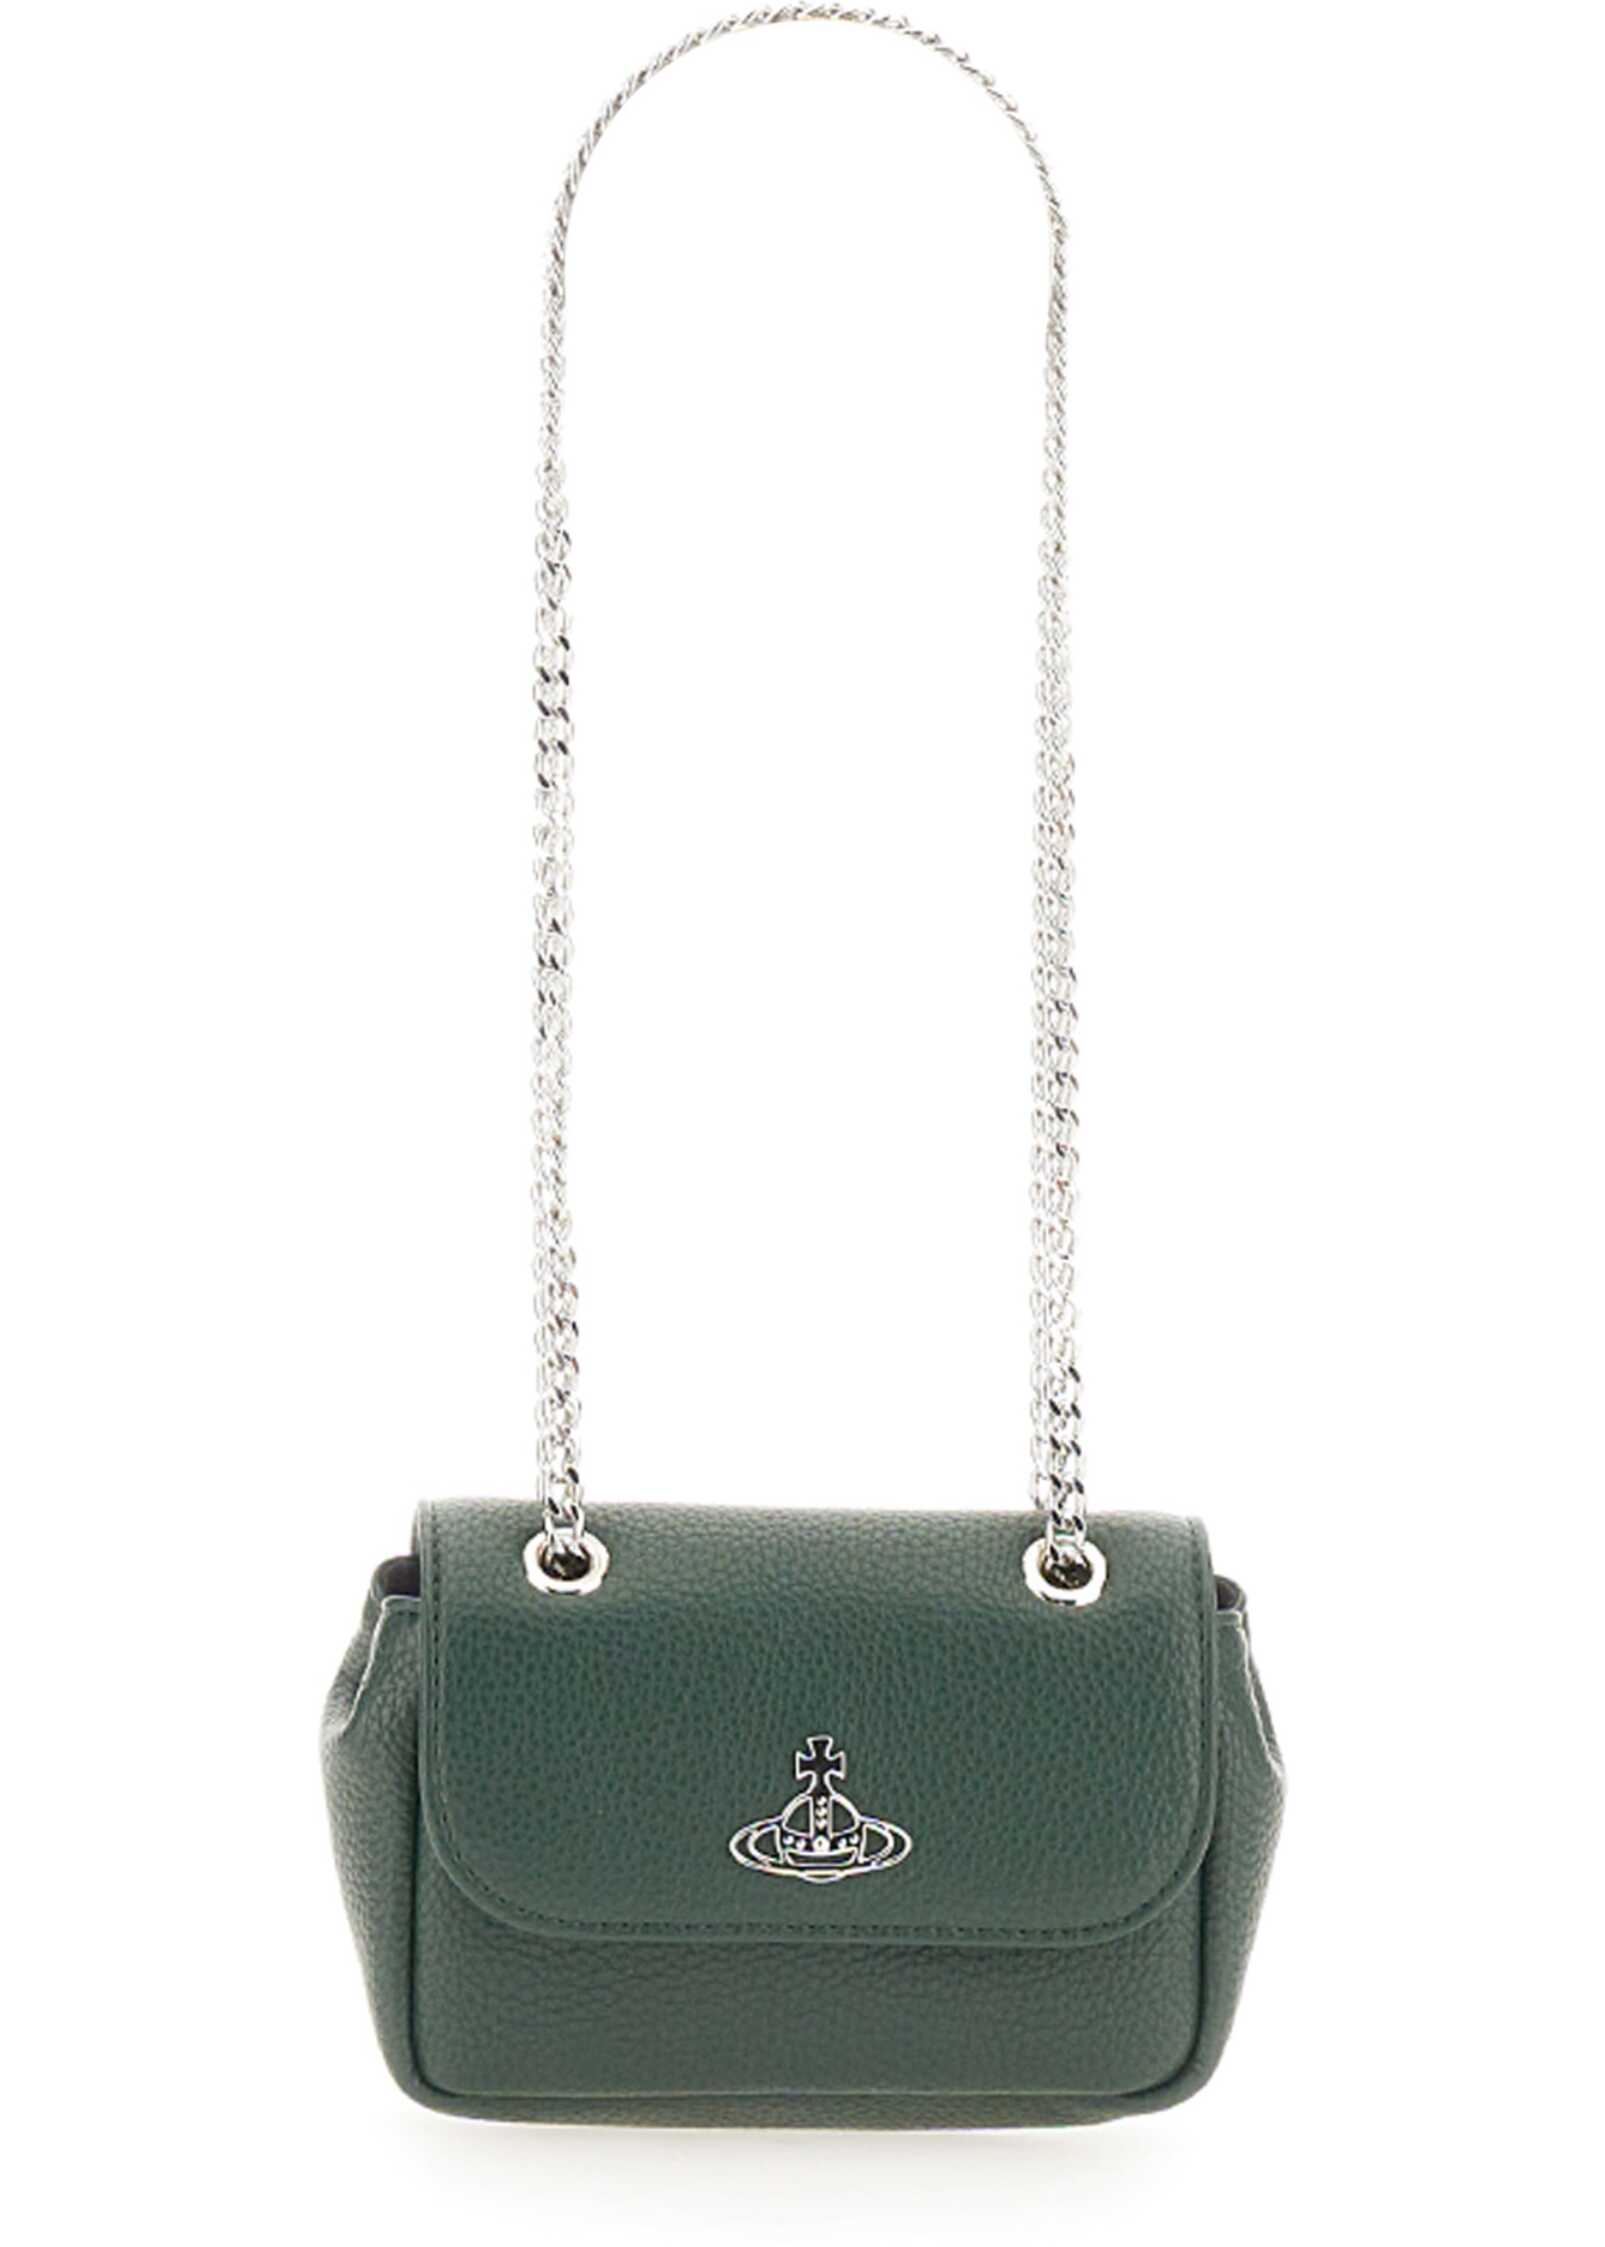 Vivienne Westwood Victoria Small Bag GREEN